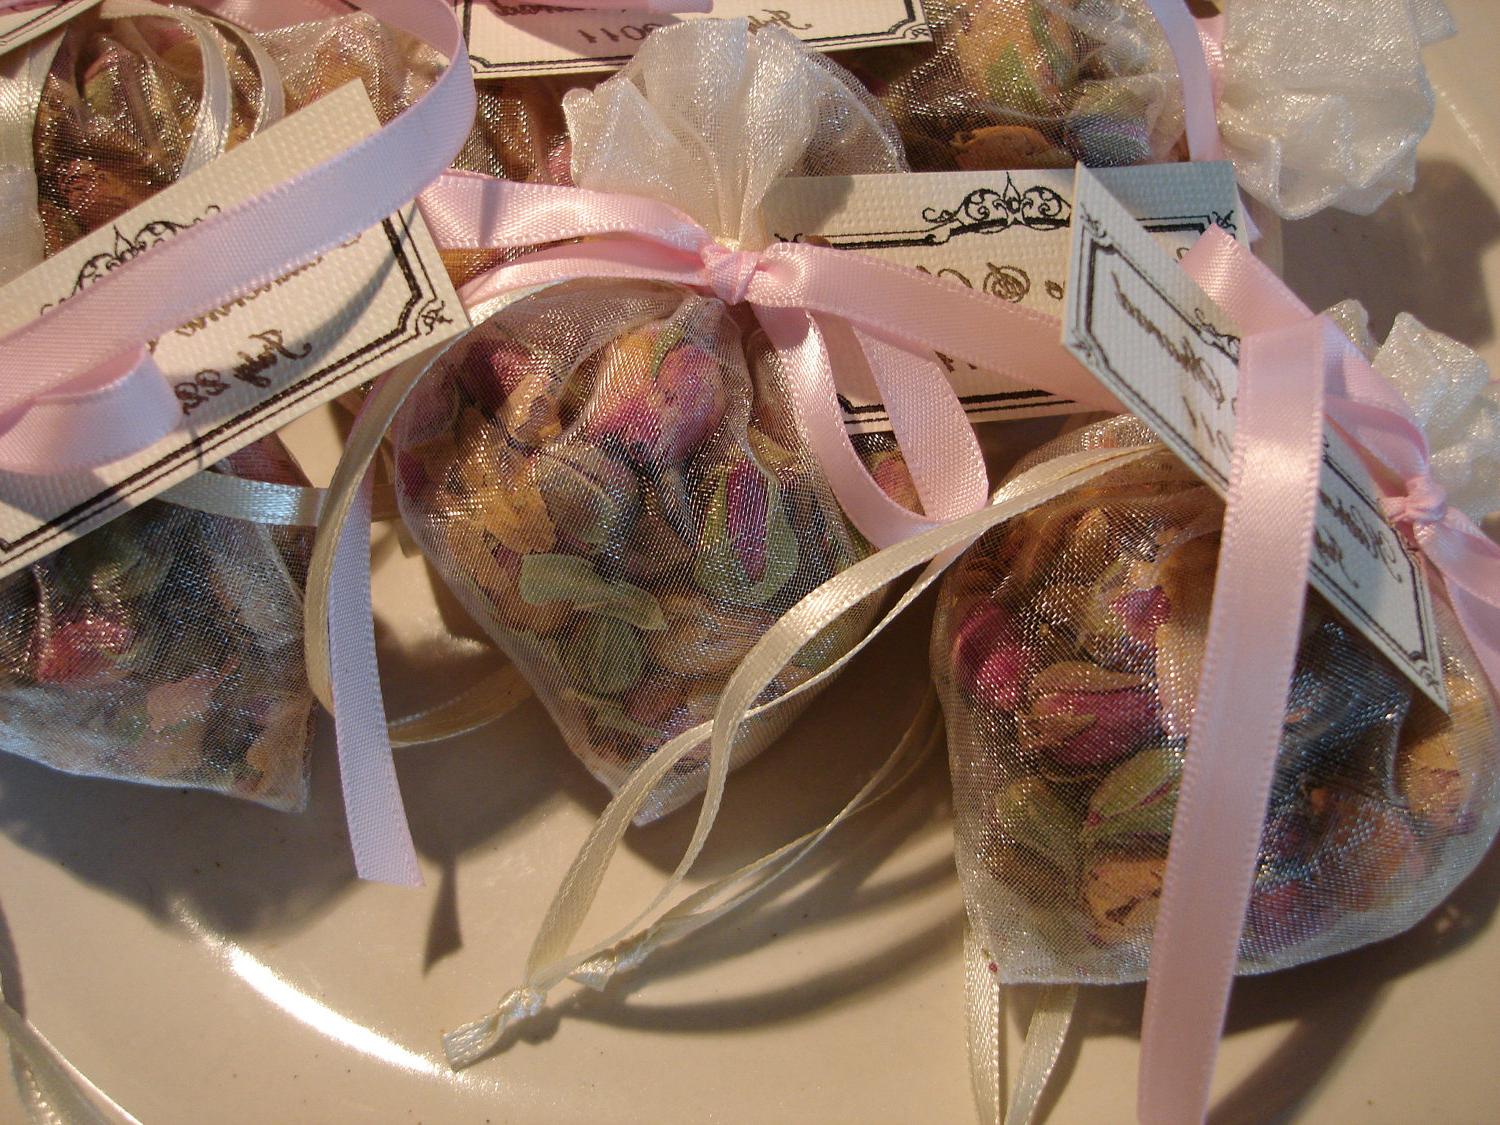 30 Wedding Favors - Heart Shaped Organza Bags Filled with Moroccan Pink Rose